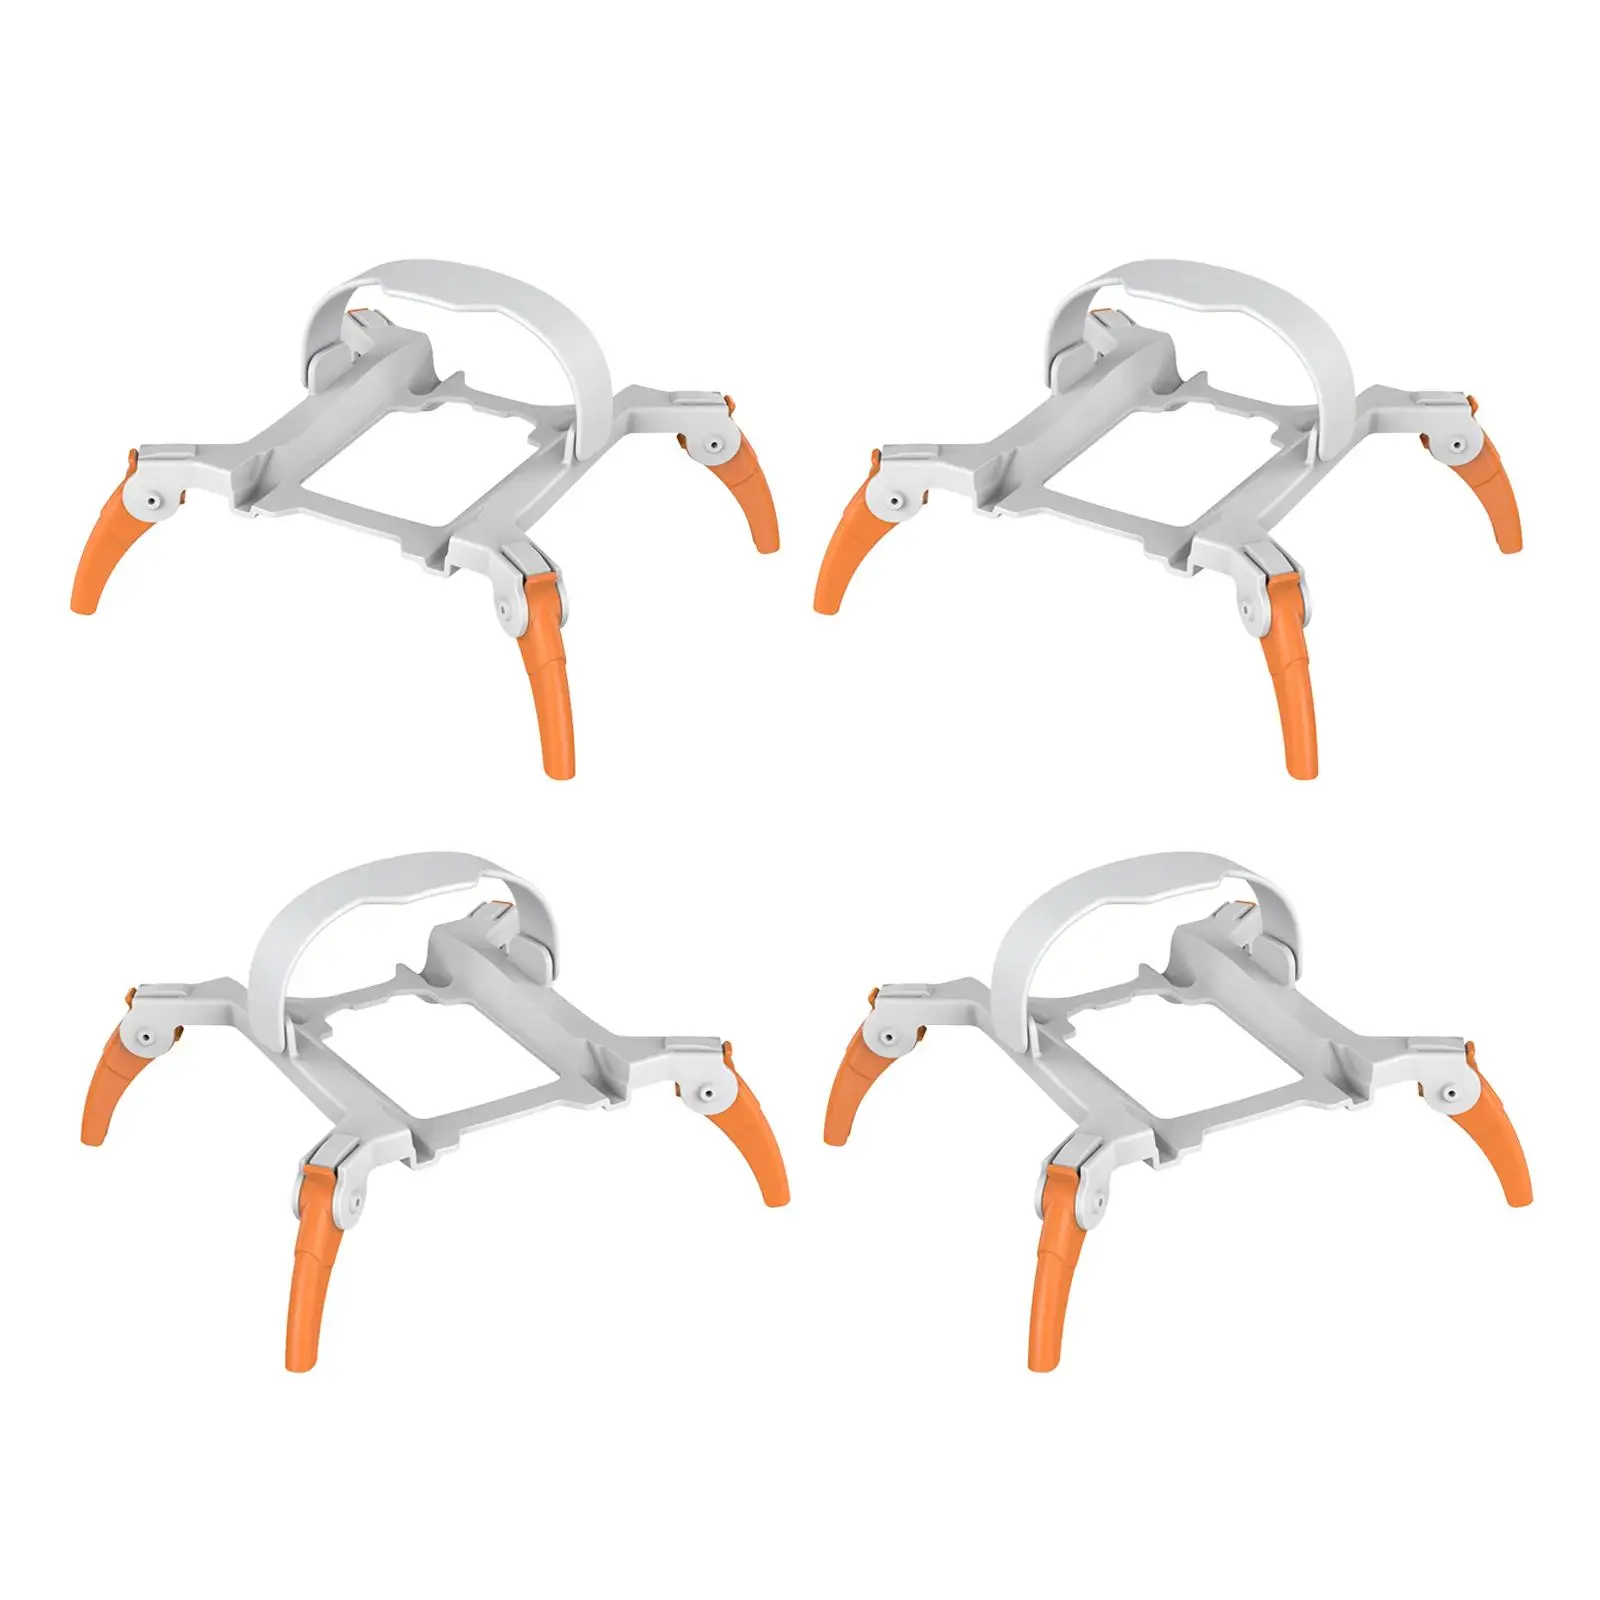 4x RC Foldable Landing Gear Support Legs Extender Protective Quick Release Height Extender for RC Airplane Replacement Parts